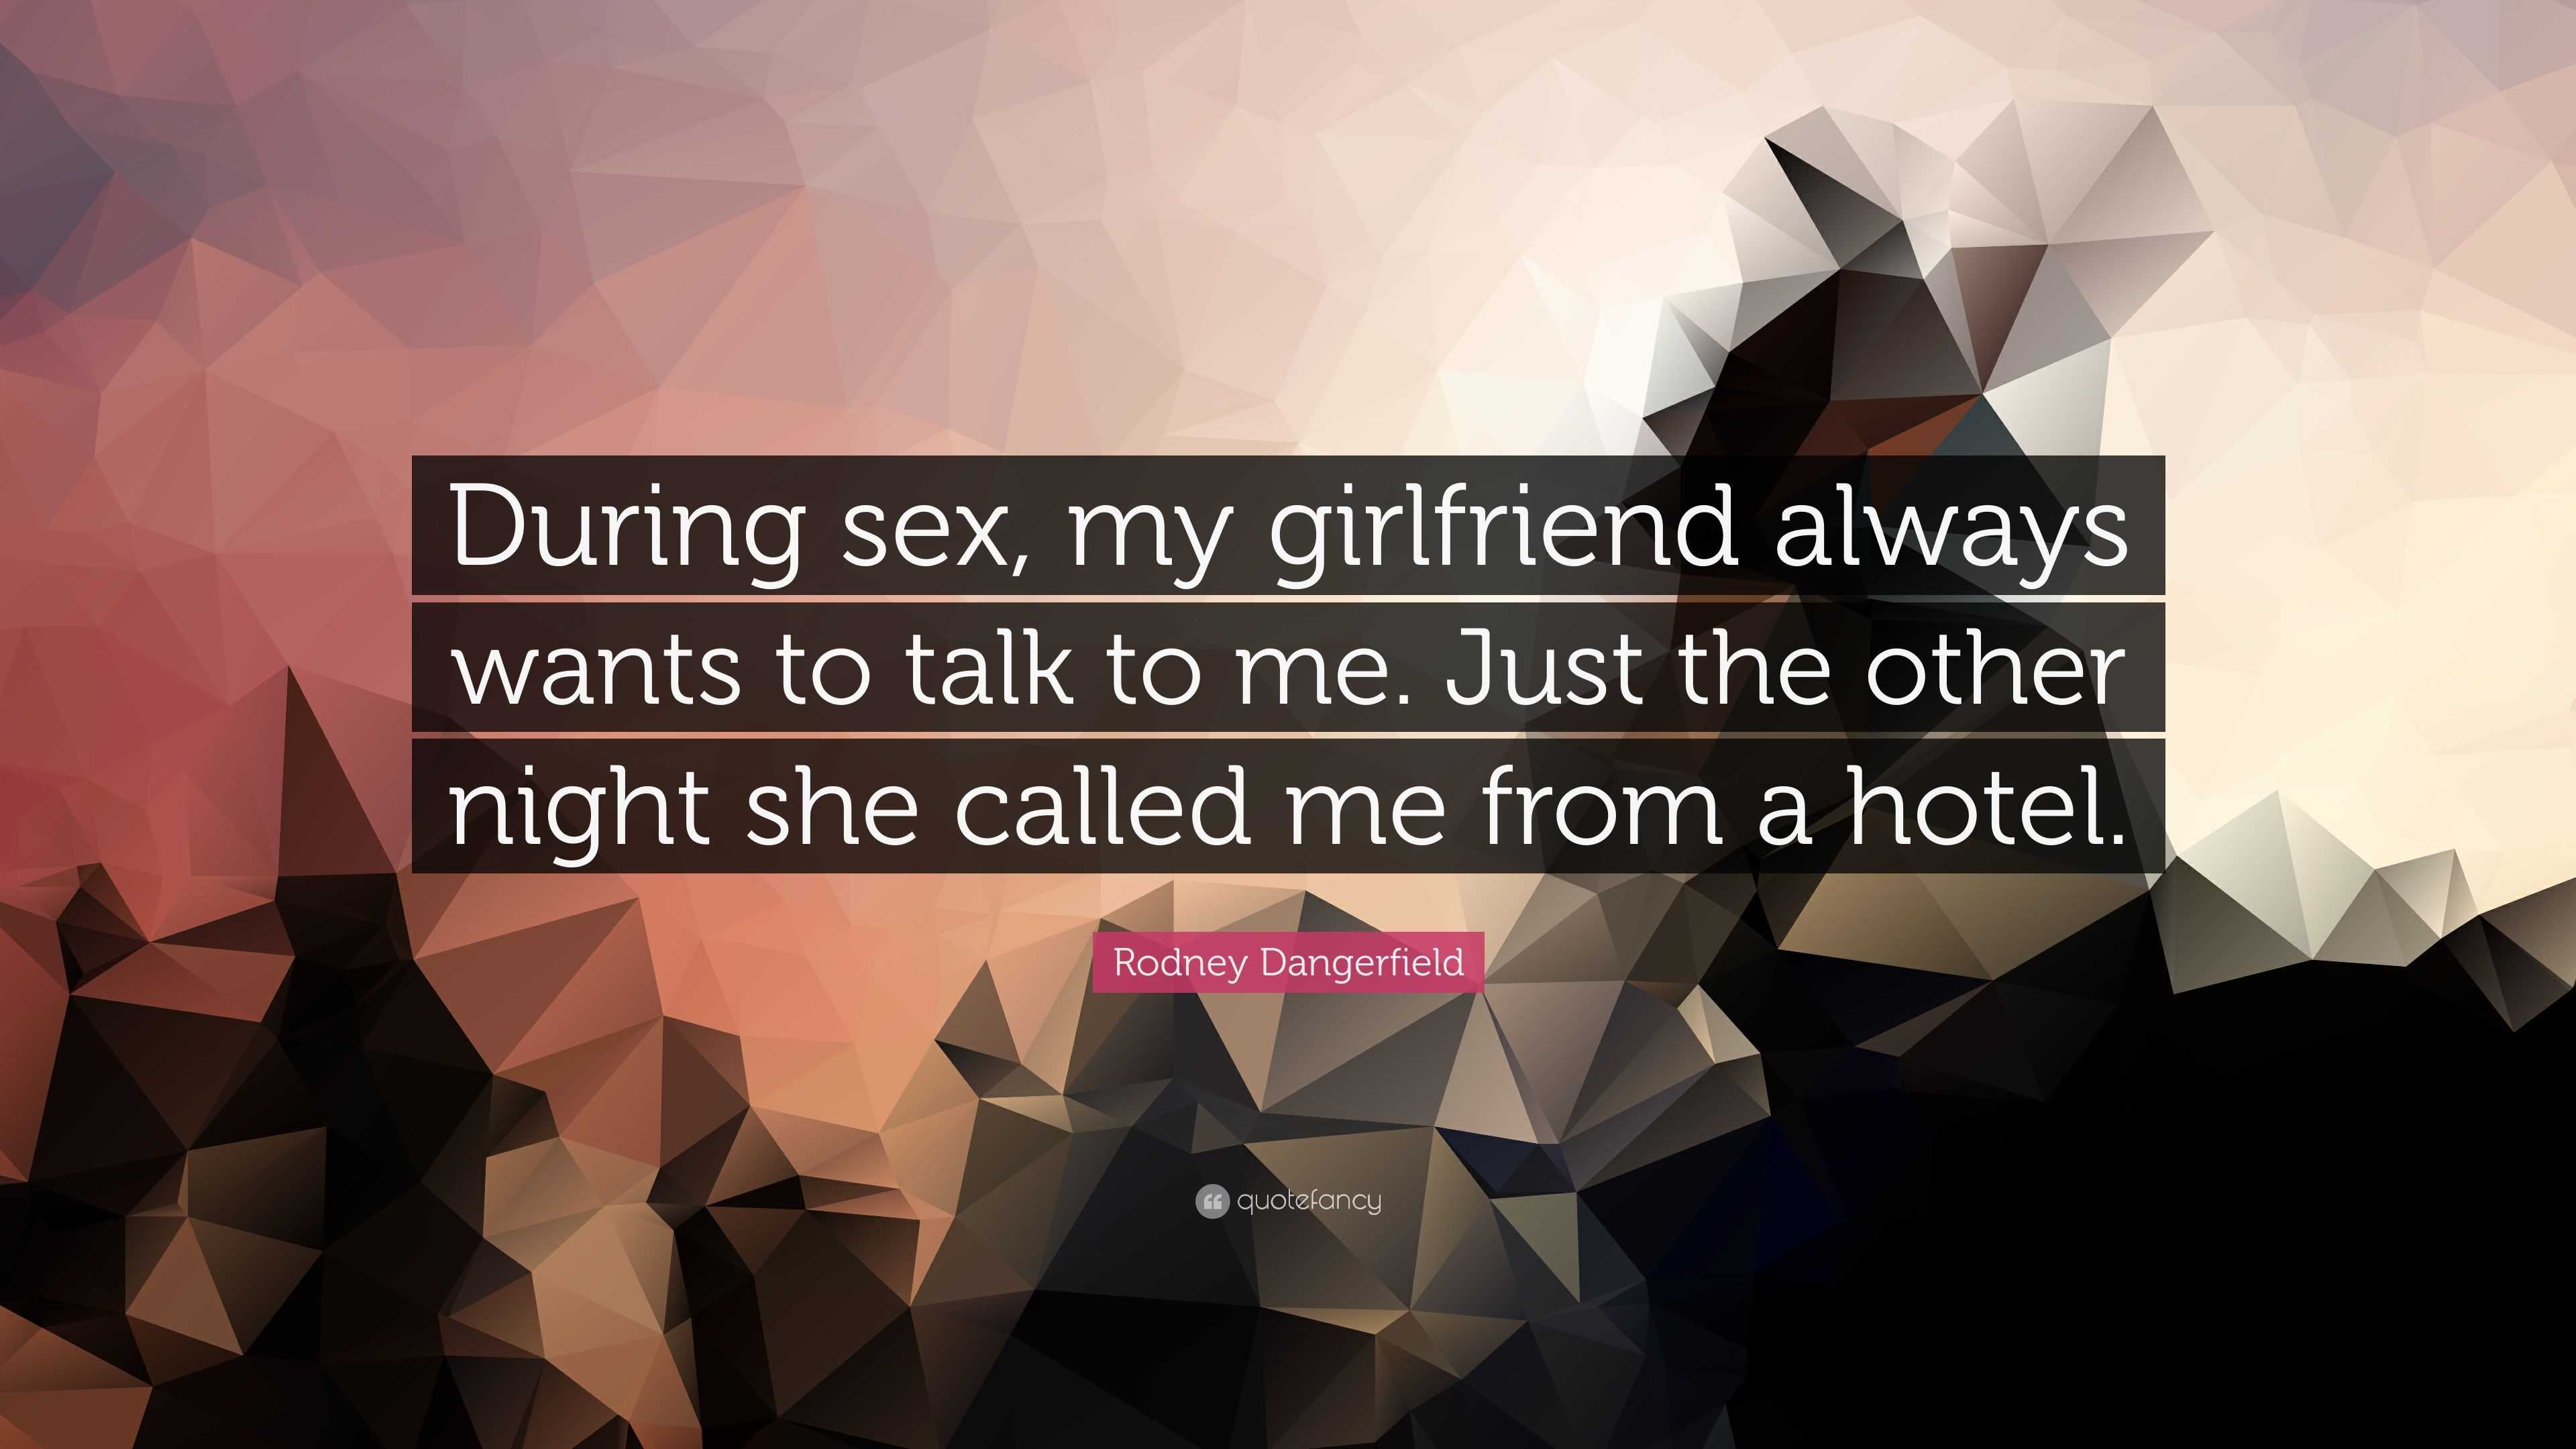 Rodney Dangerfield Quote “During sex, my girlfriend always wants to talk to me image image